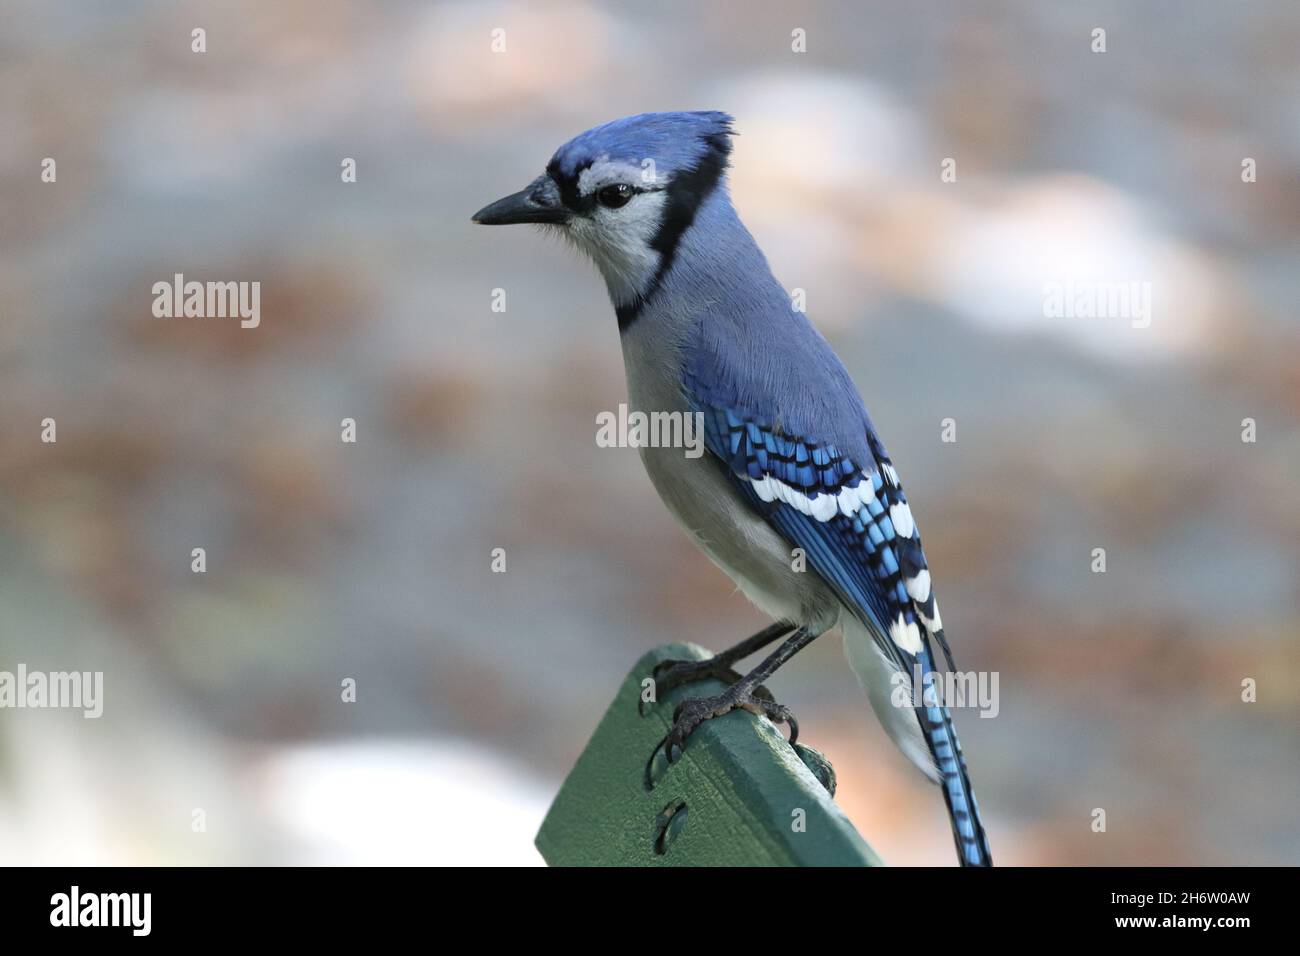 Closeup shot of a blue jay perched on the surface of a bench in Halifax, Germant Stock Photo